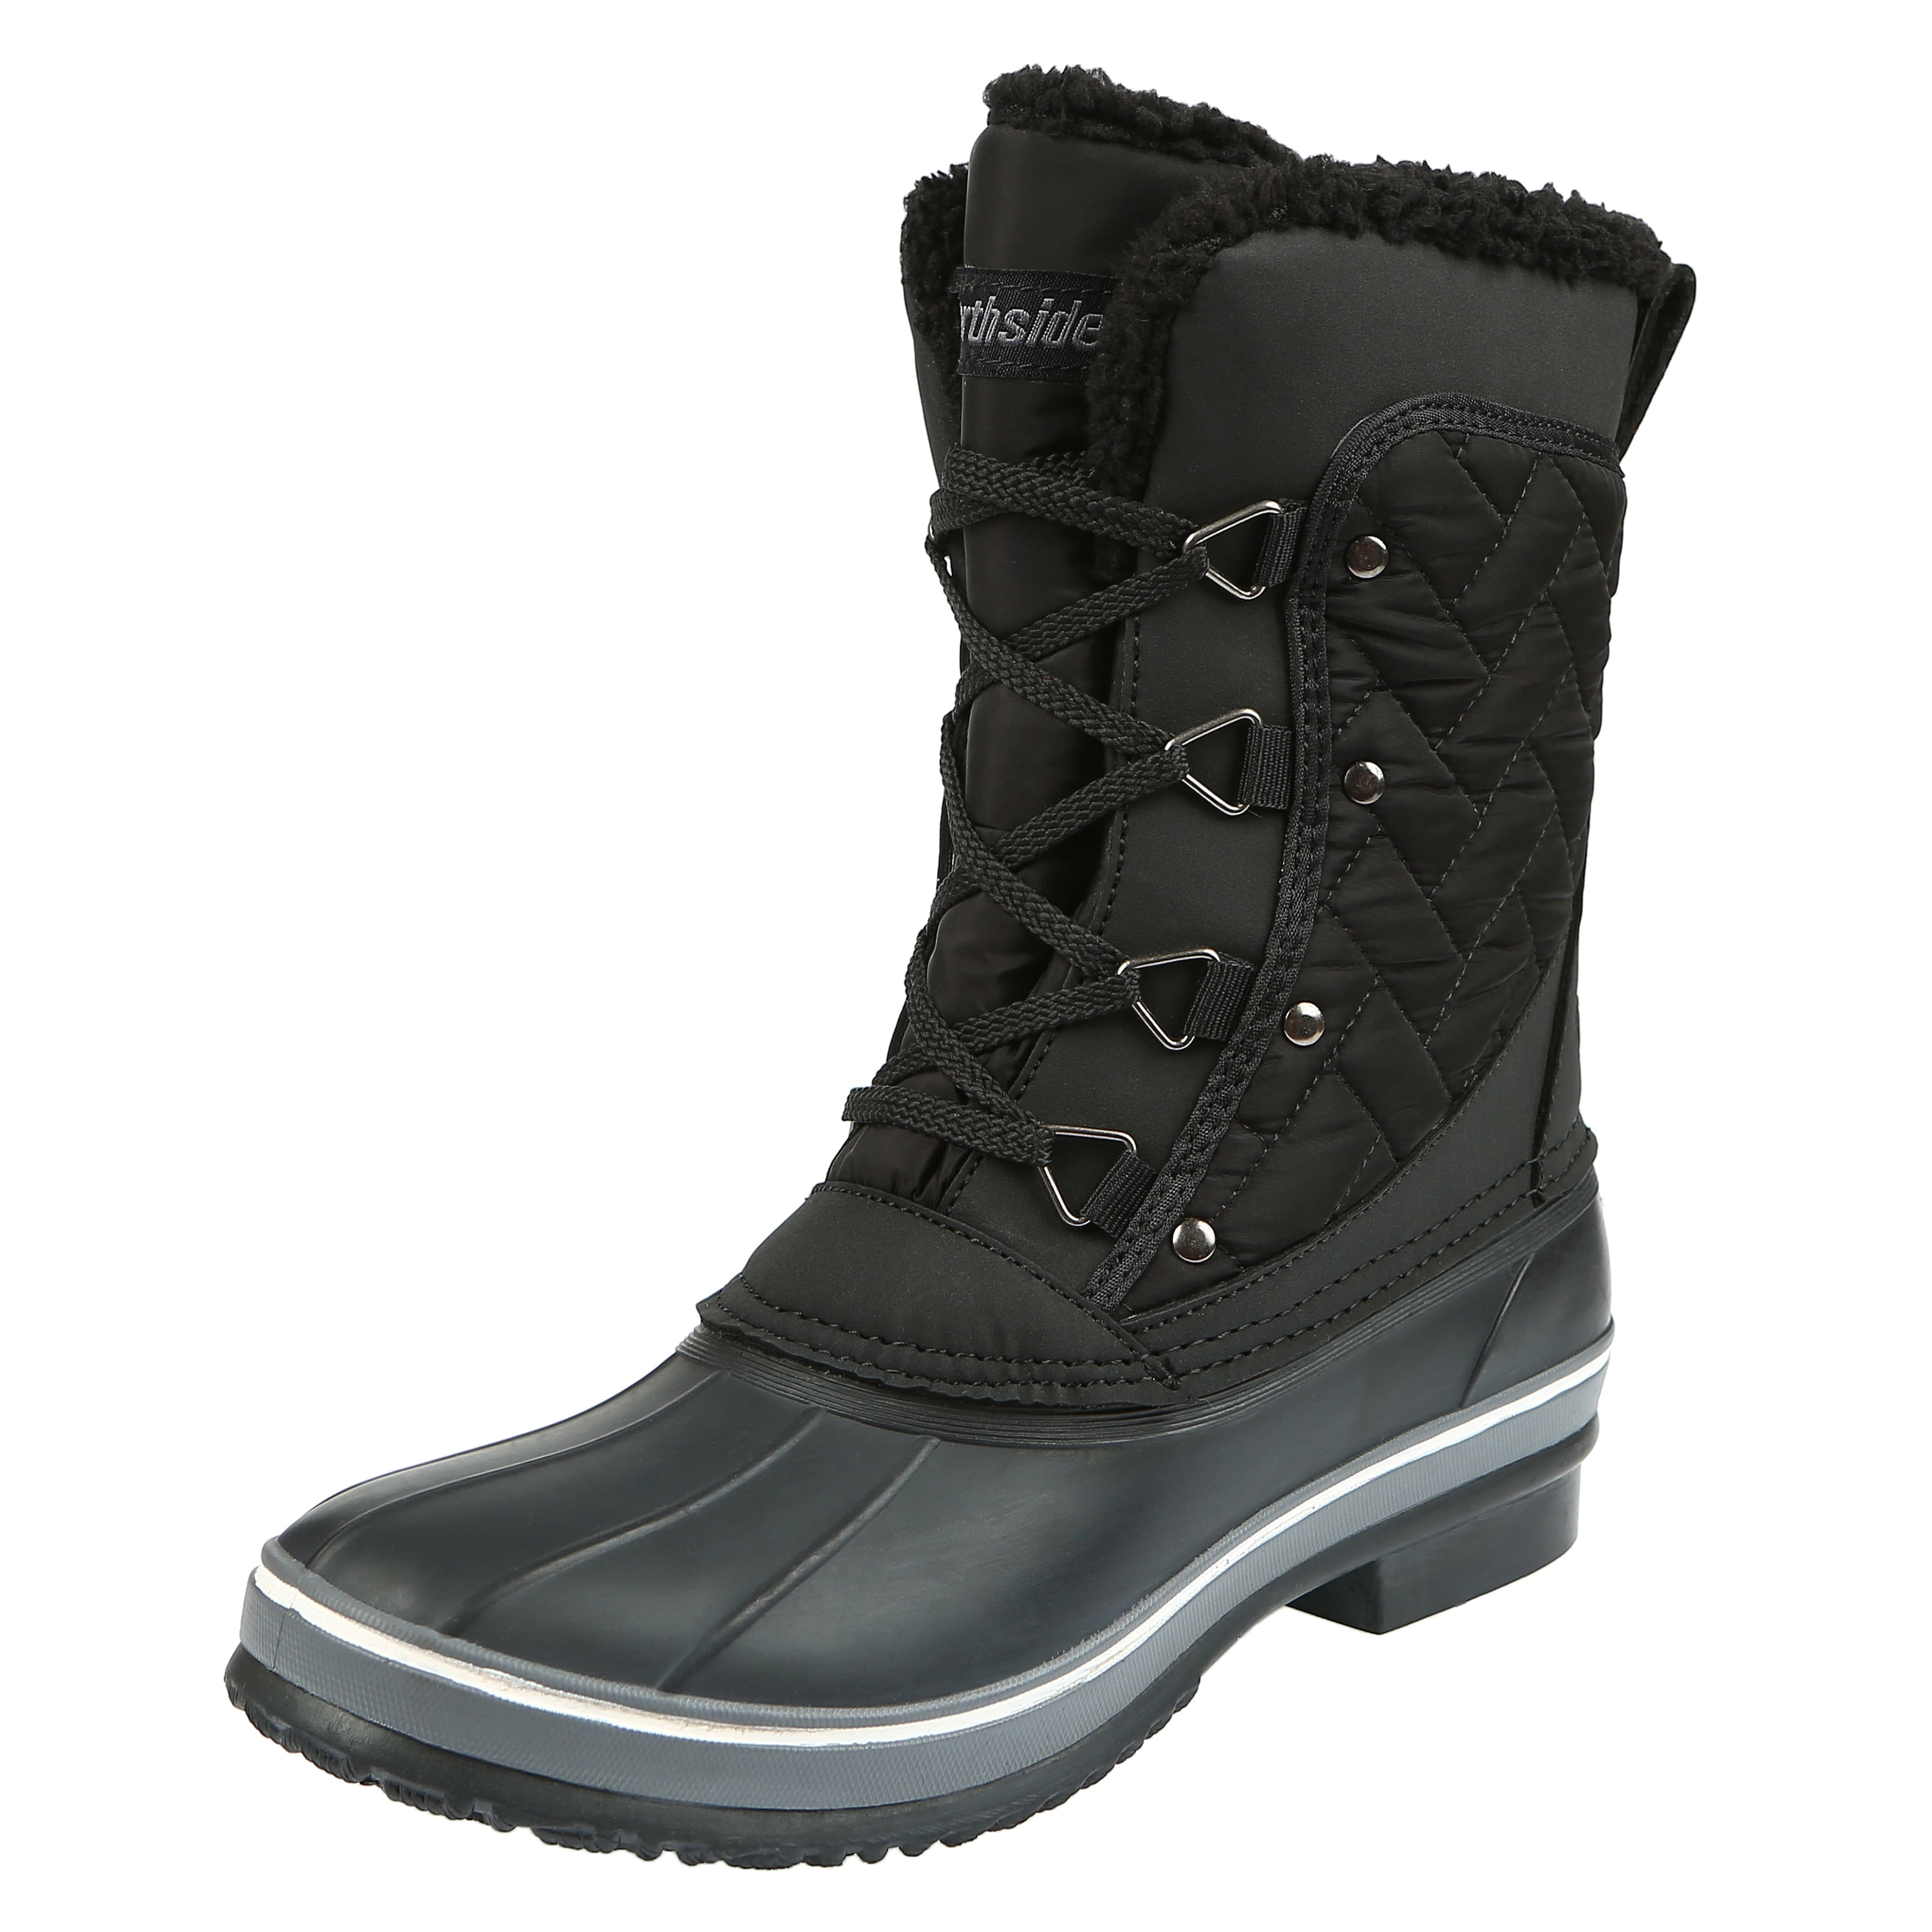 Northside - Northside Womens Modesto Waterproof Insulated Quilted Mid ...